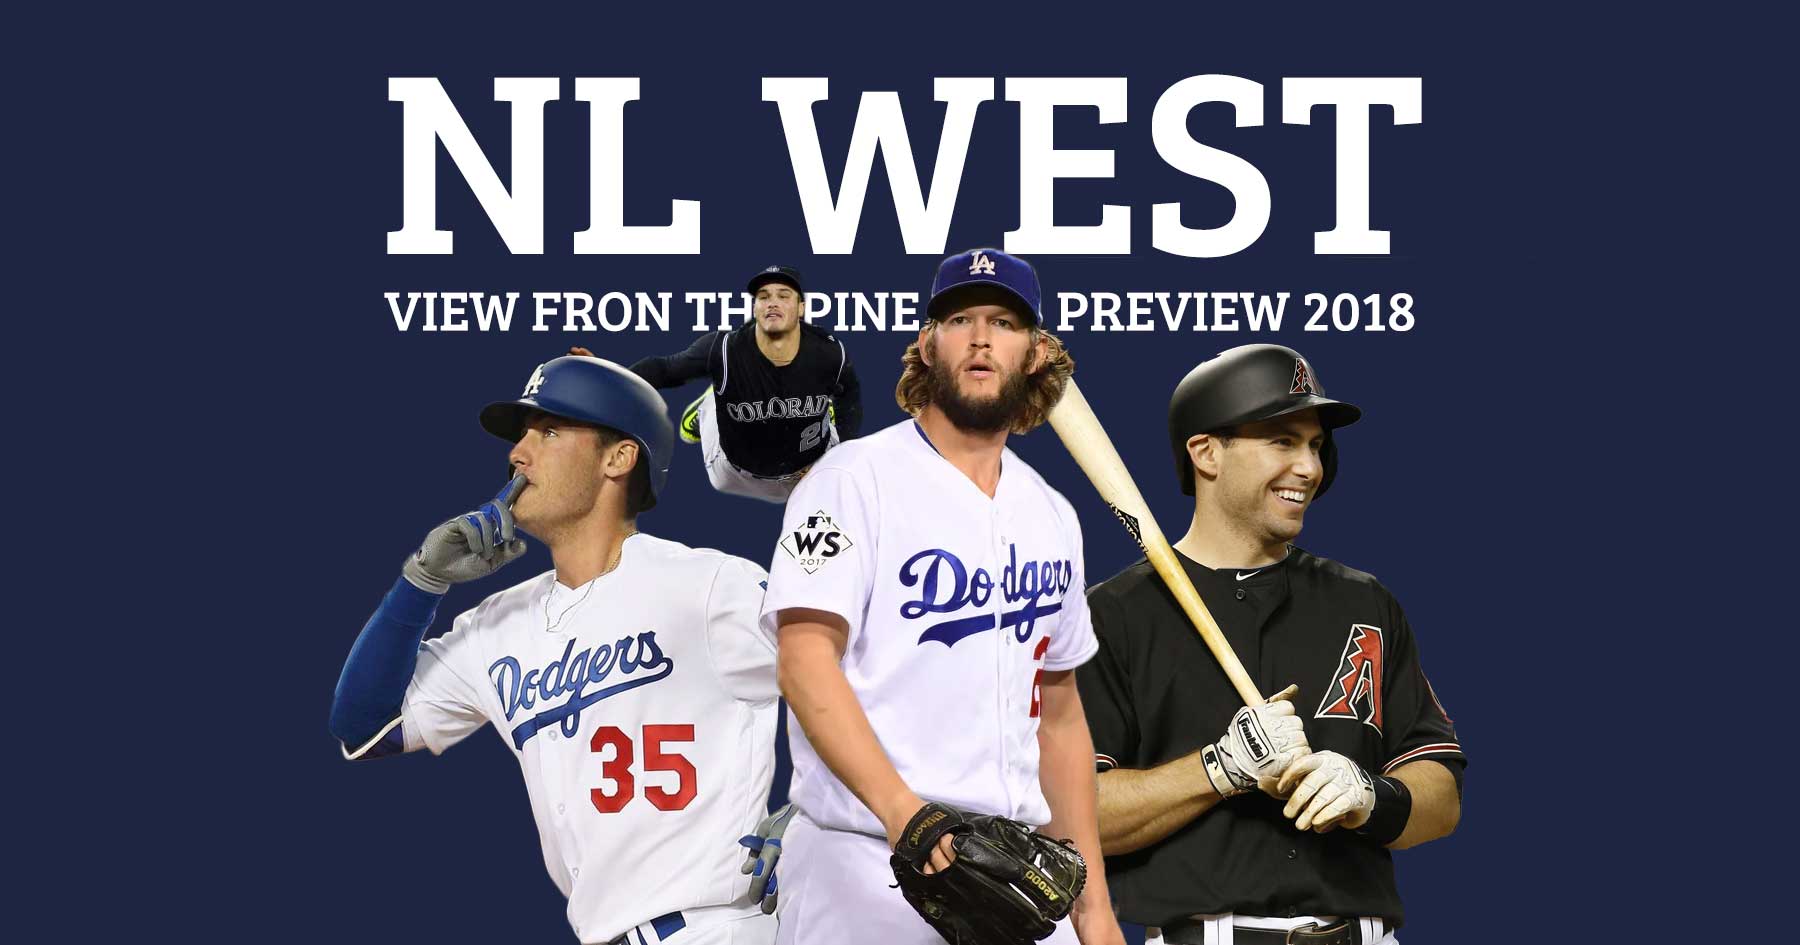 MLB Preview 2018: NL West